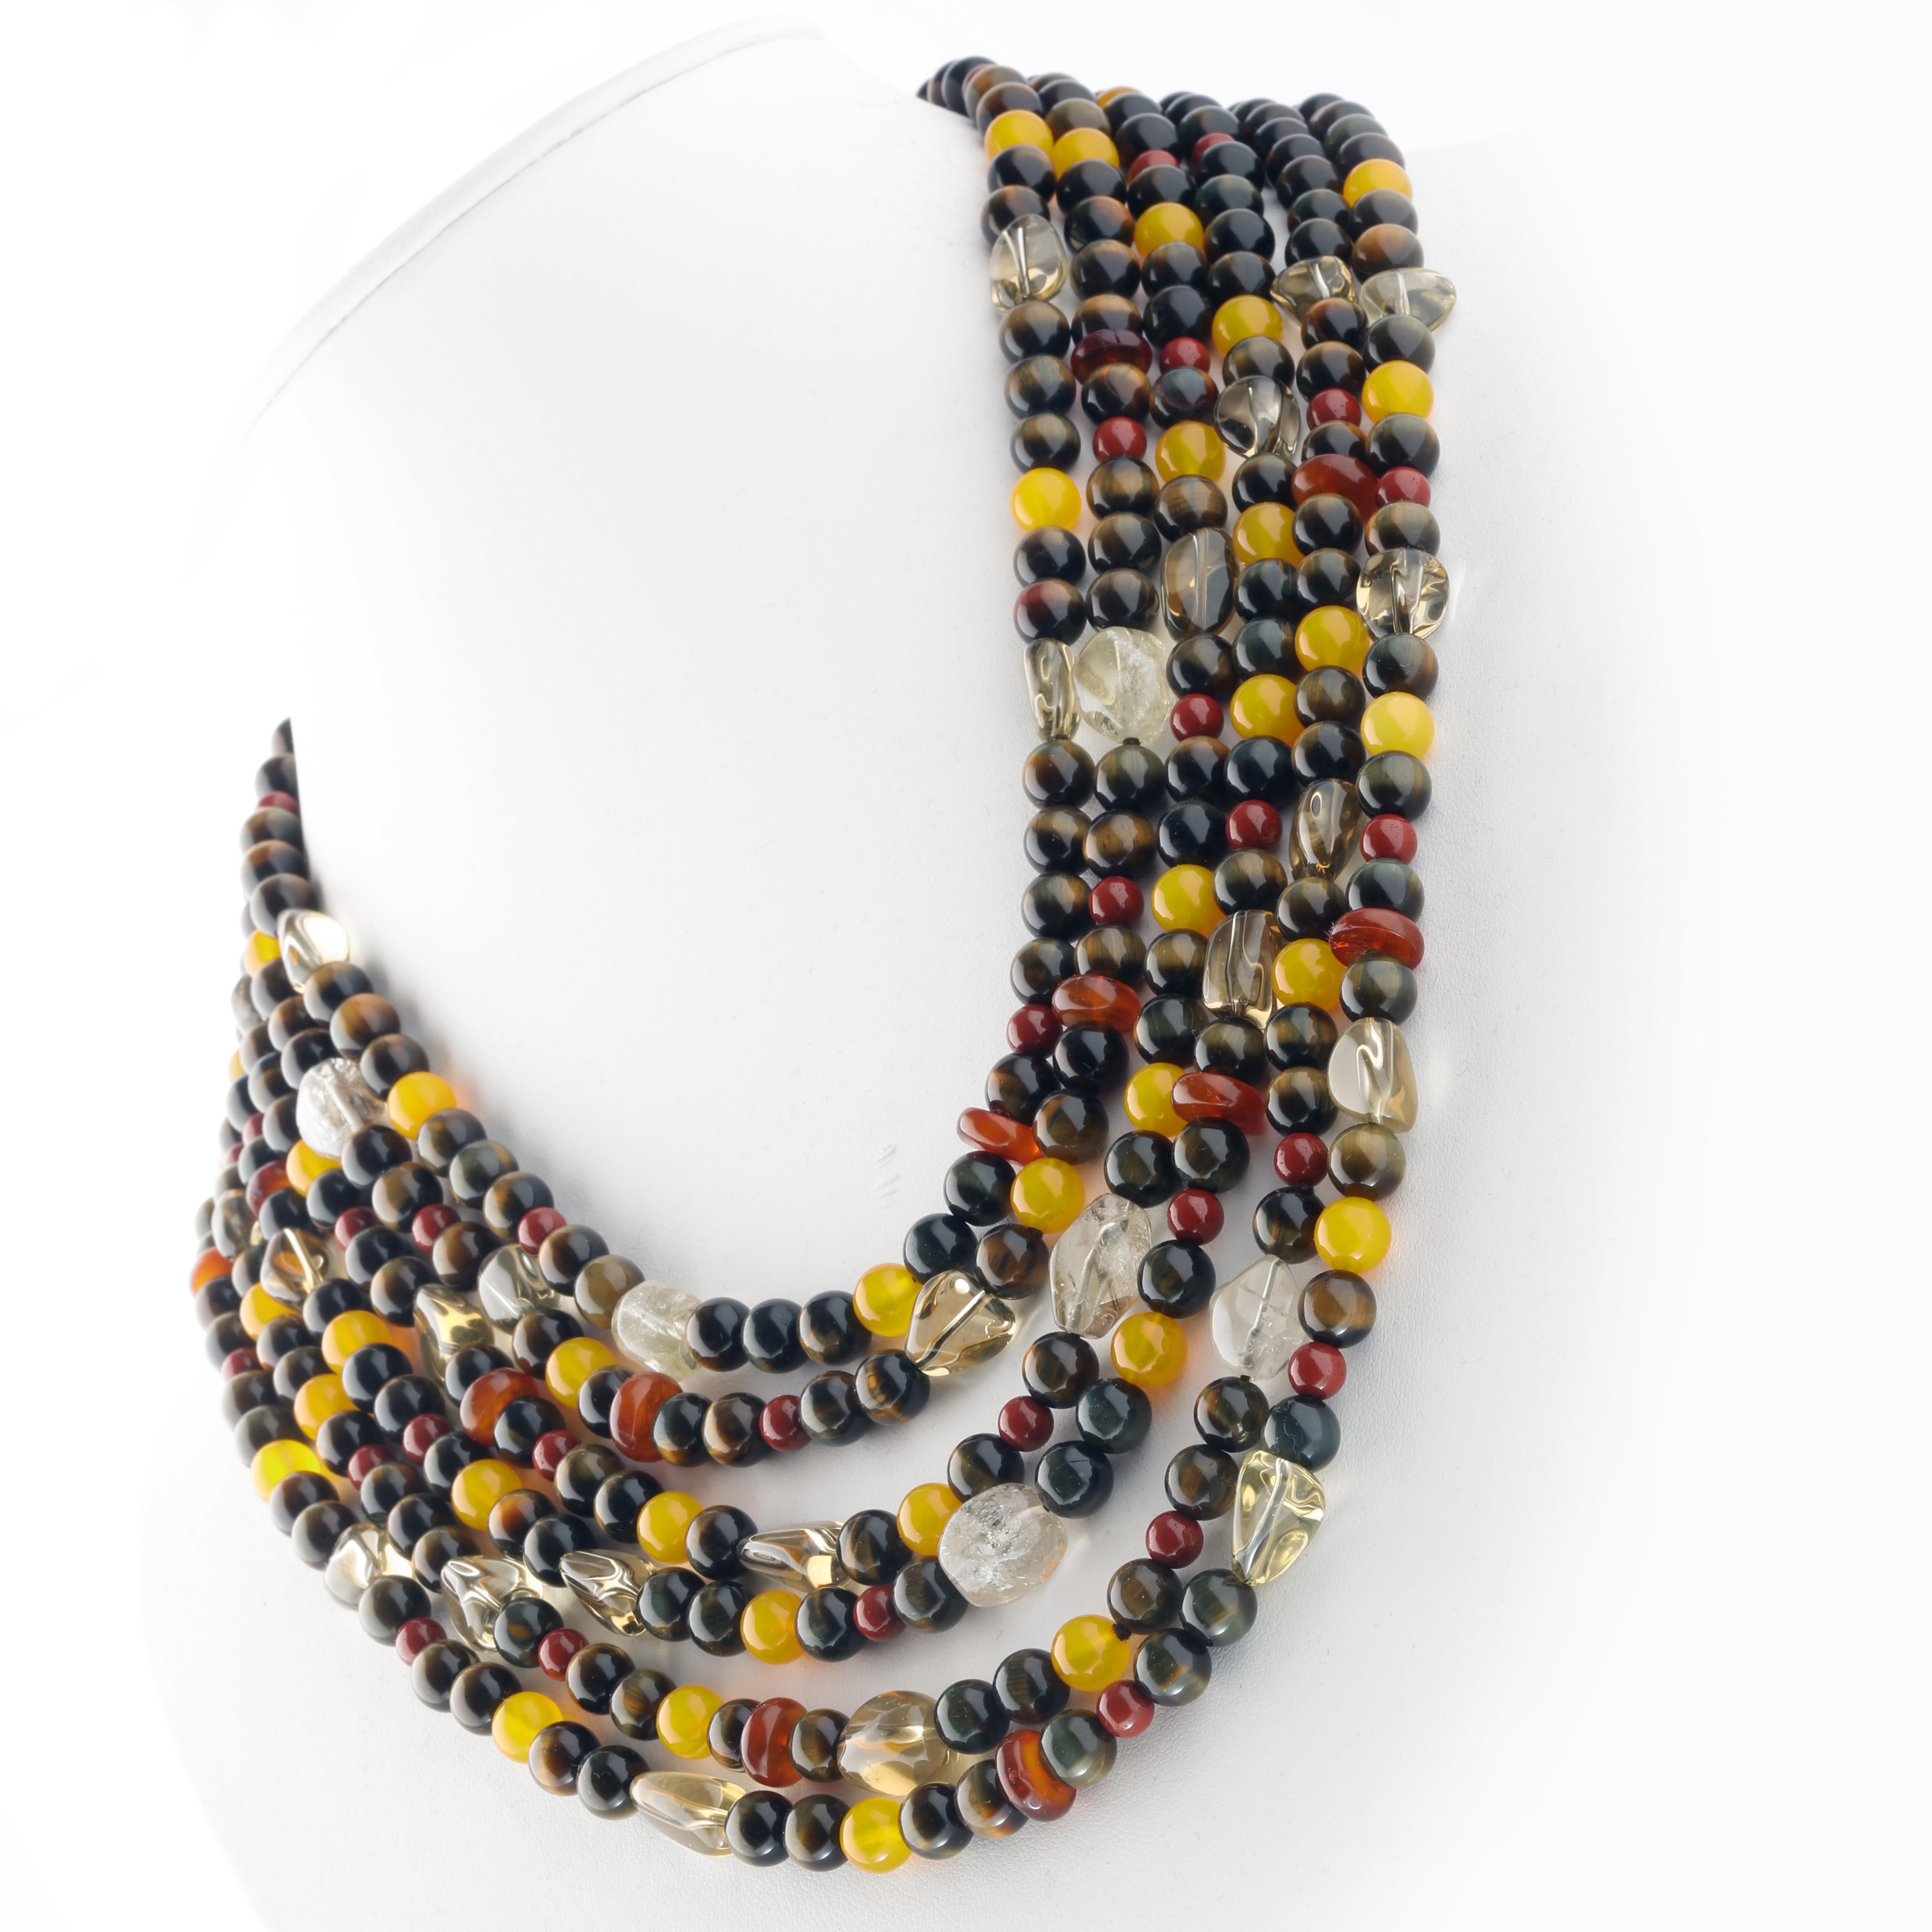 Timeless elegance for a one-of-a-kind multi-strand necklace, featuring hard and semi-precious beads of the highest quality.

• 925 sterling silver closure
• Beads utilised: Falcon's Eye, Yellow Agate, Red Jasper, Lemon Citrine, Amber Rondelles
•